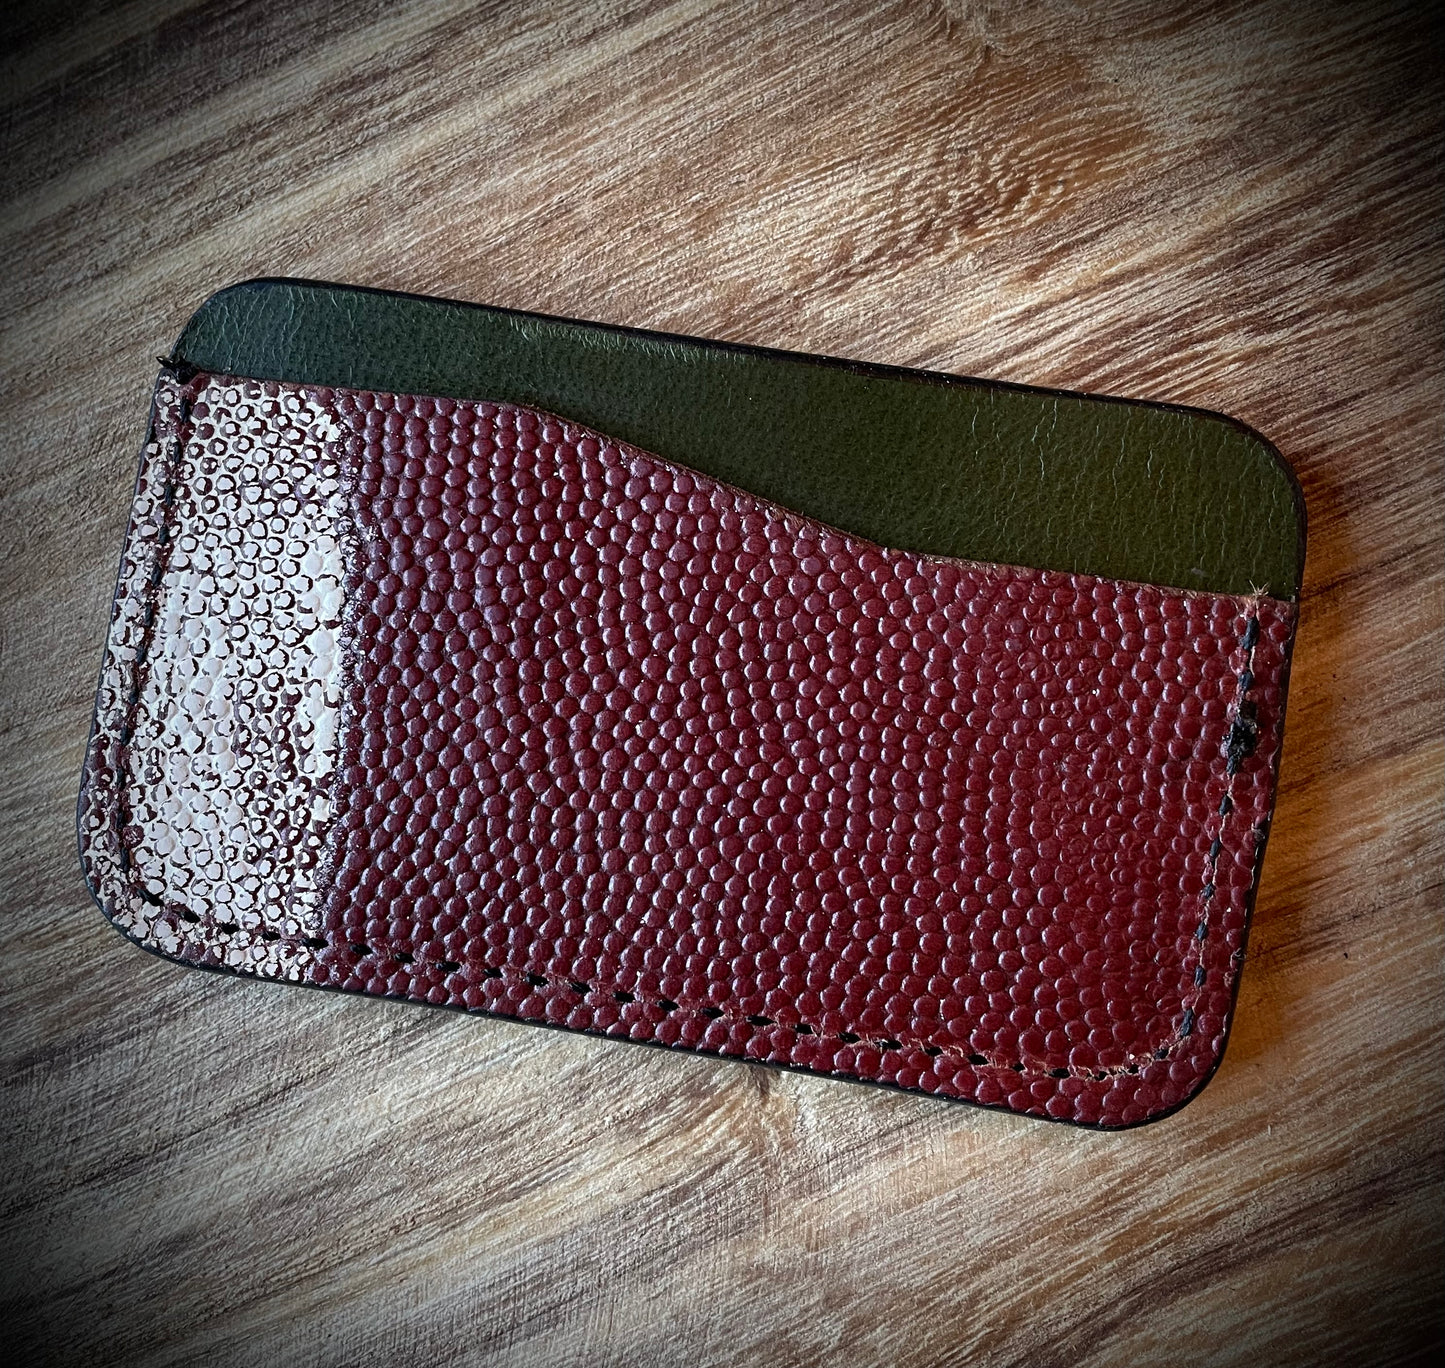 The Rudy-green leather